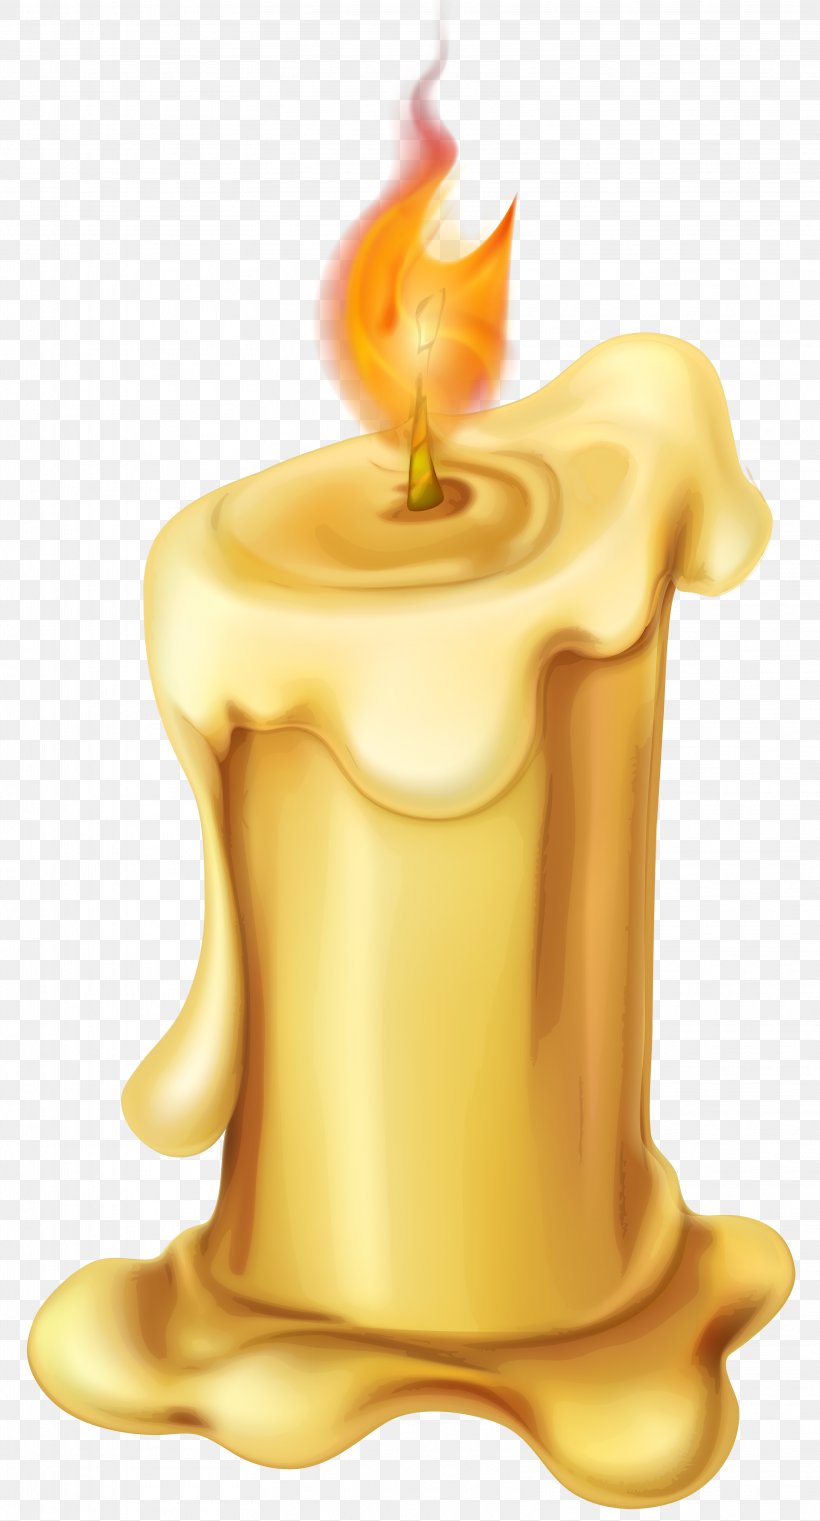 Candle Clip Art, PNG, 3233x6000px, Candle, Wax, Yellow Download Free